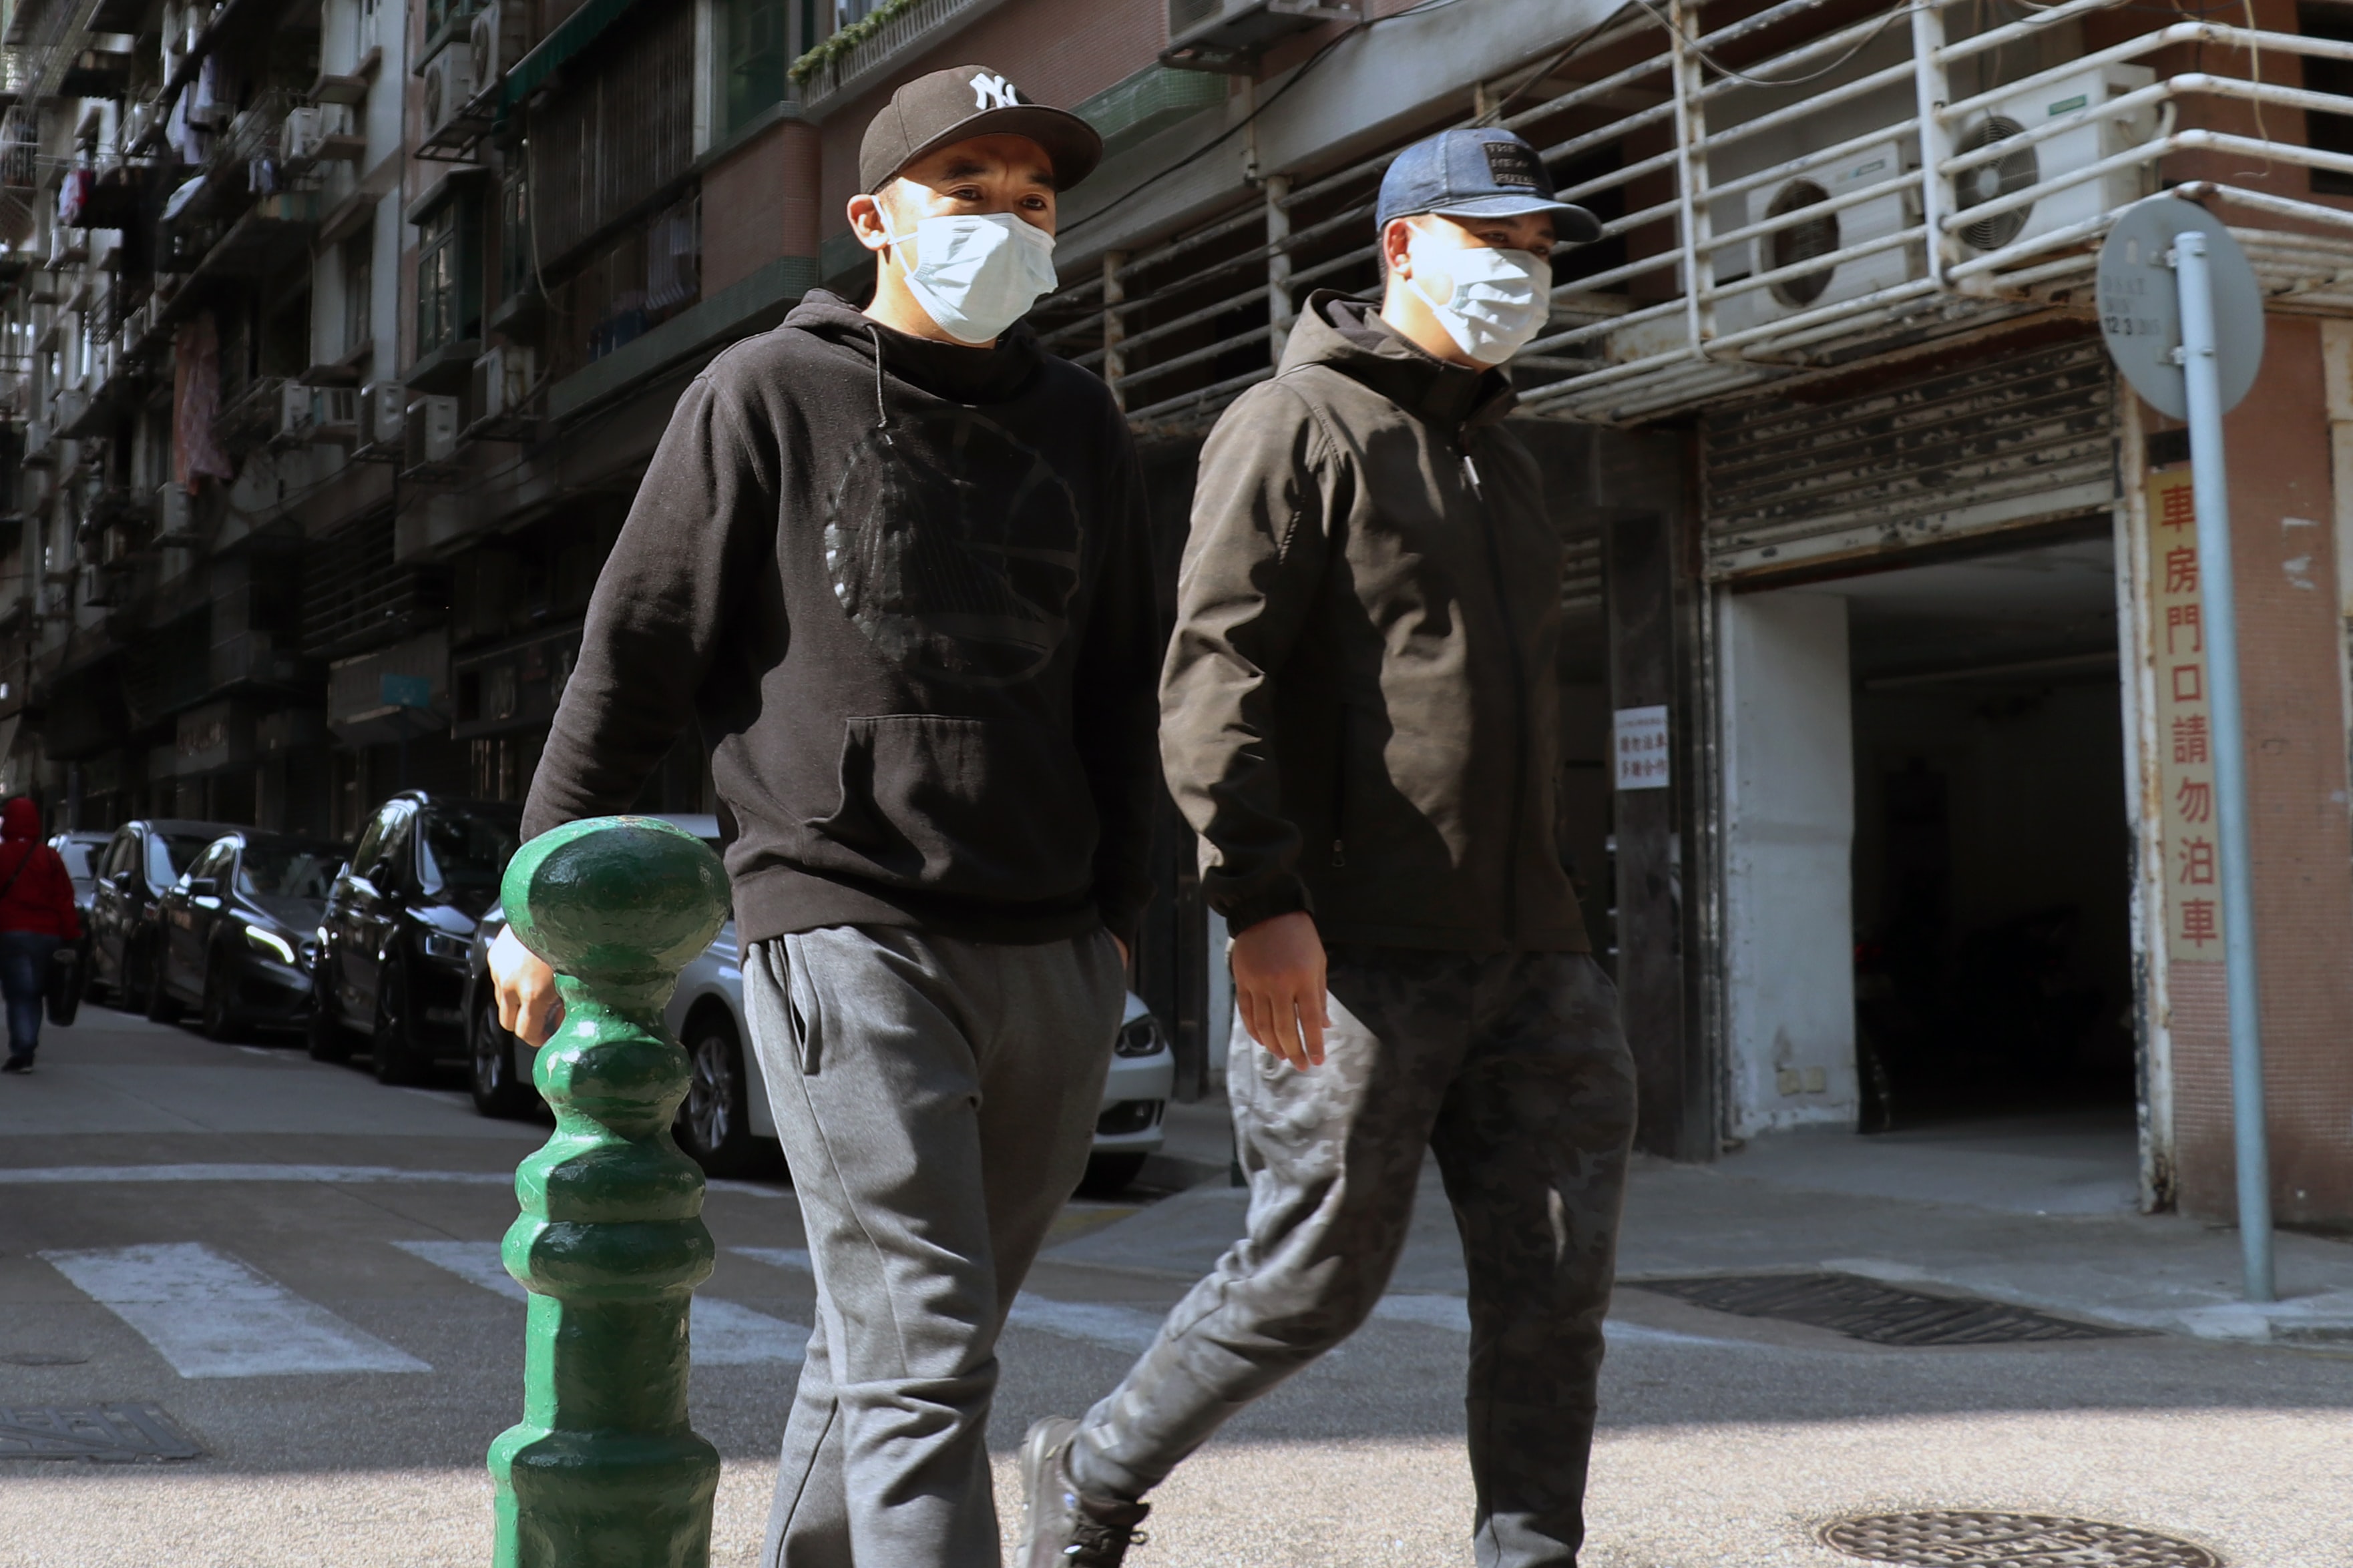 People walk on the street in Macau wearing face masks to protect themselves from coronavirus.